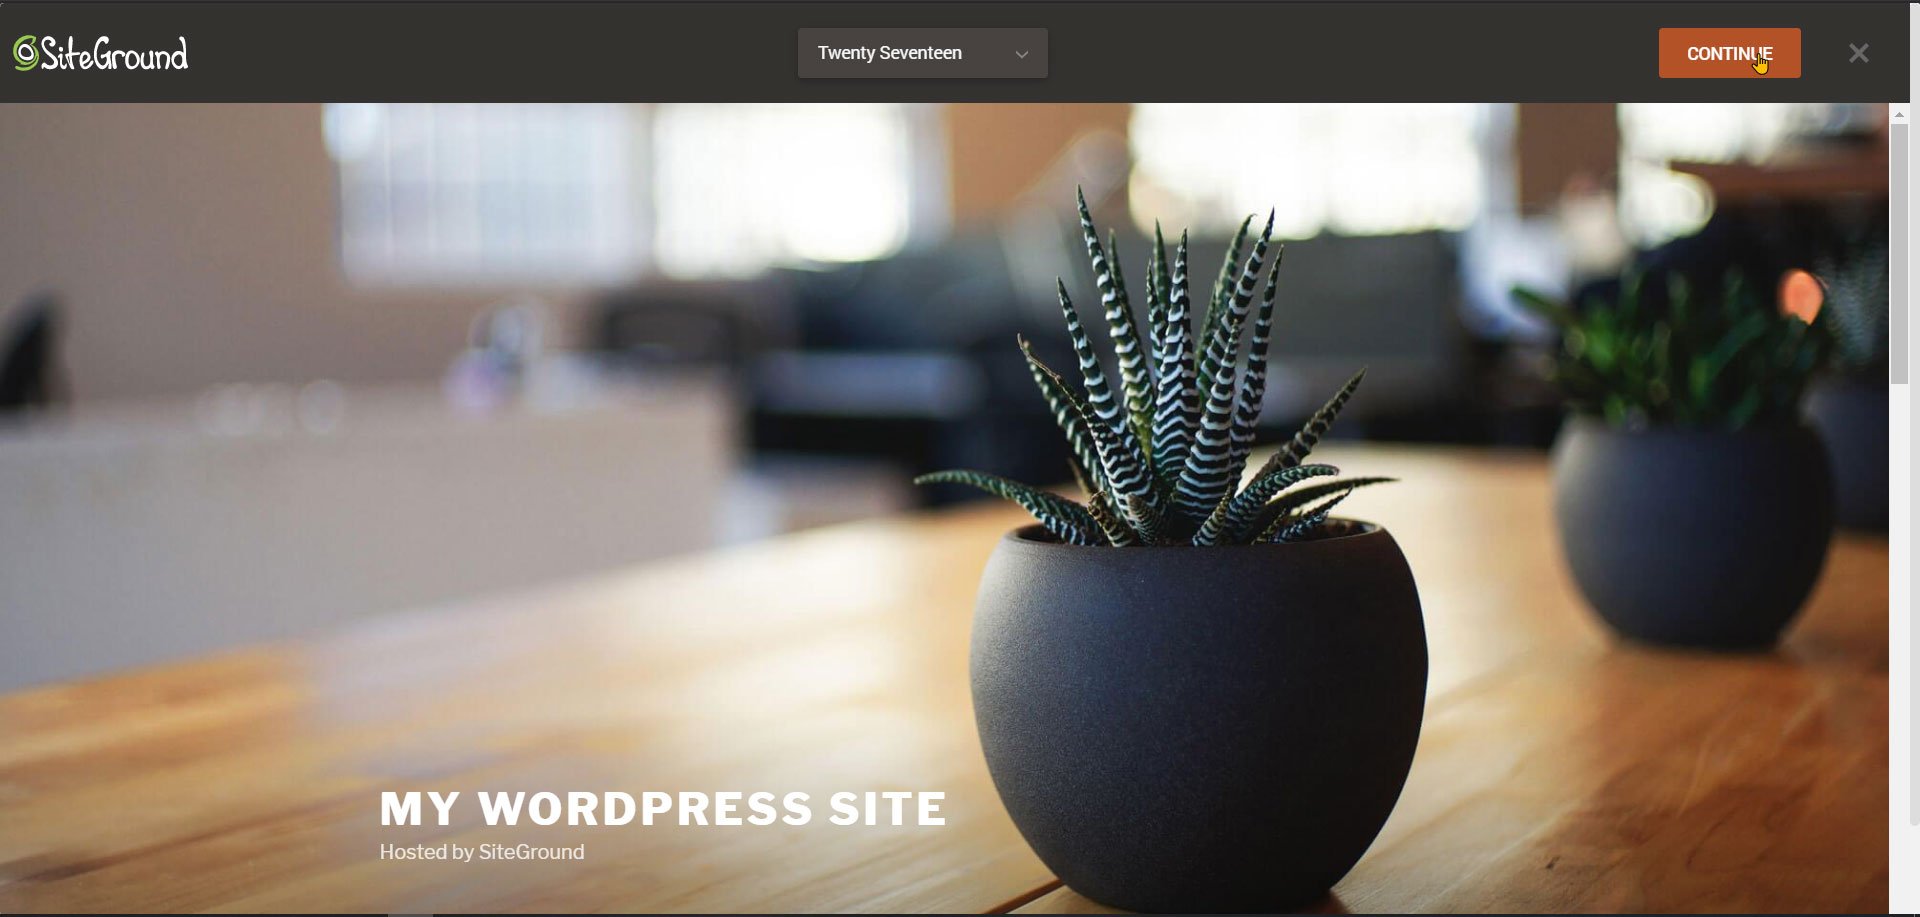 How To Install WordPress On SiteGround Step 8.1